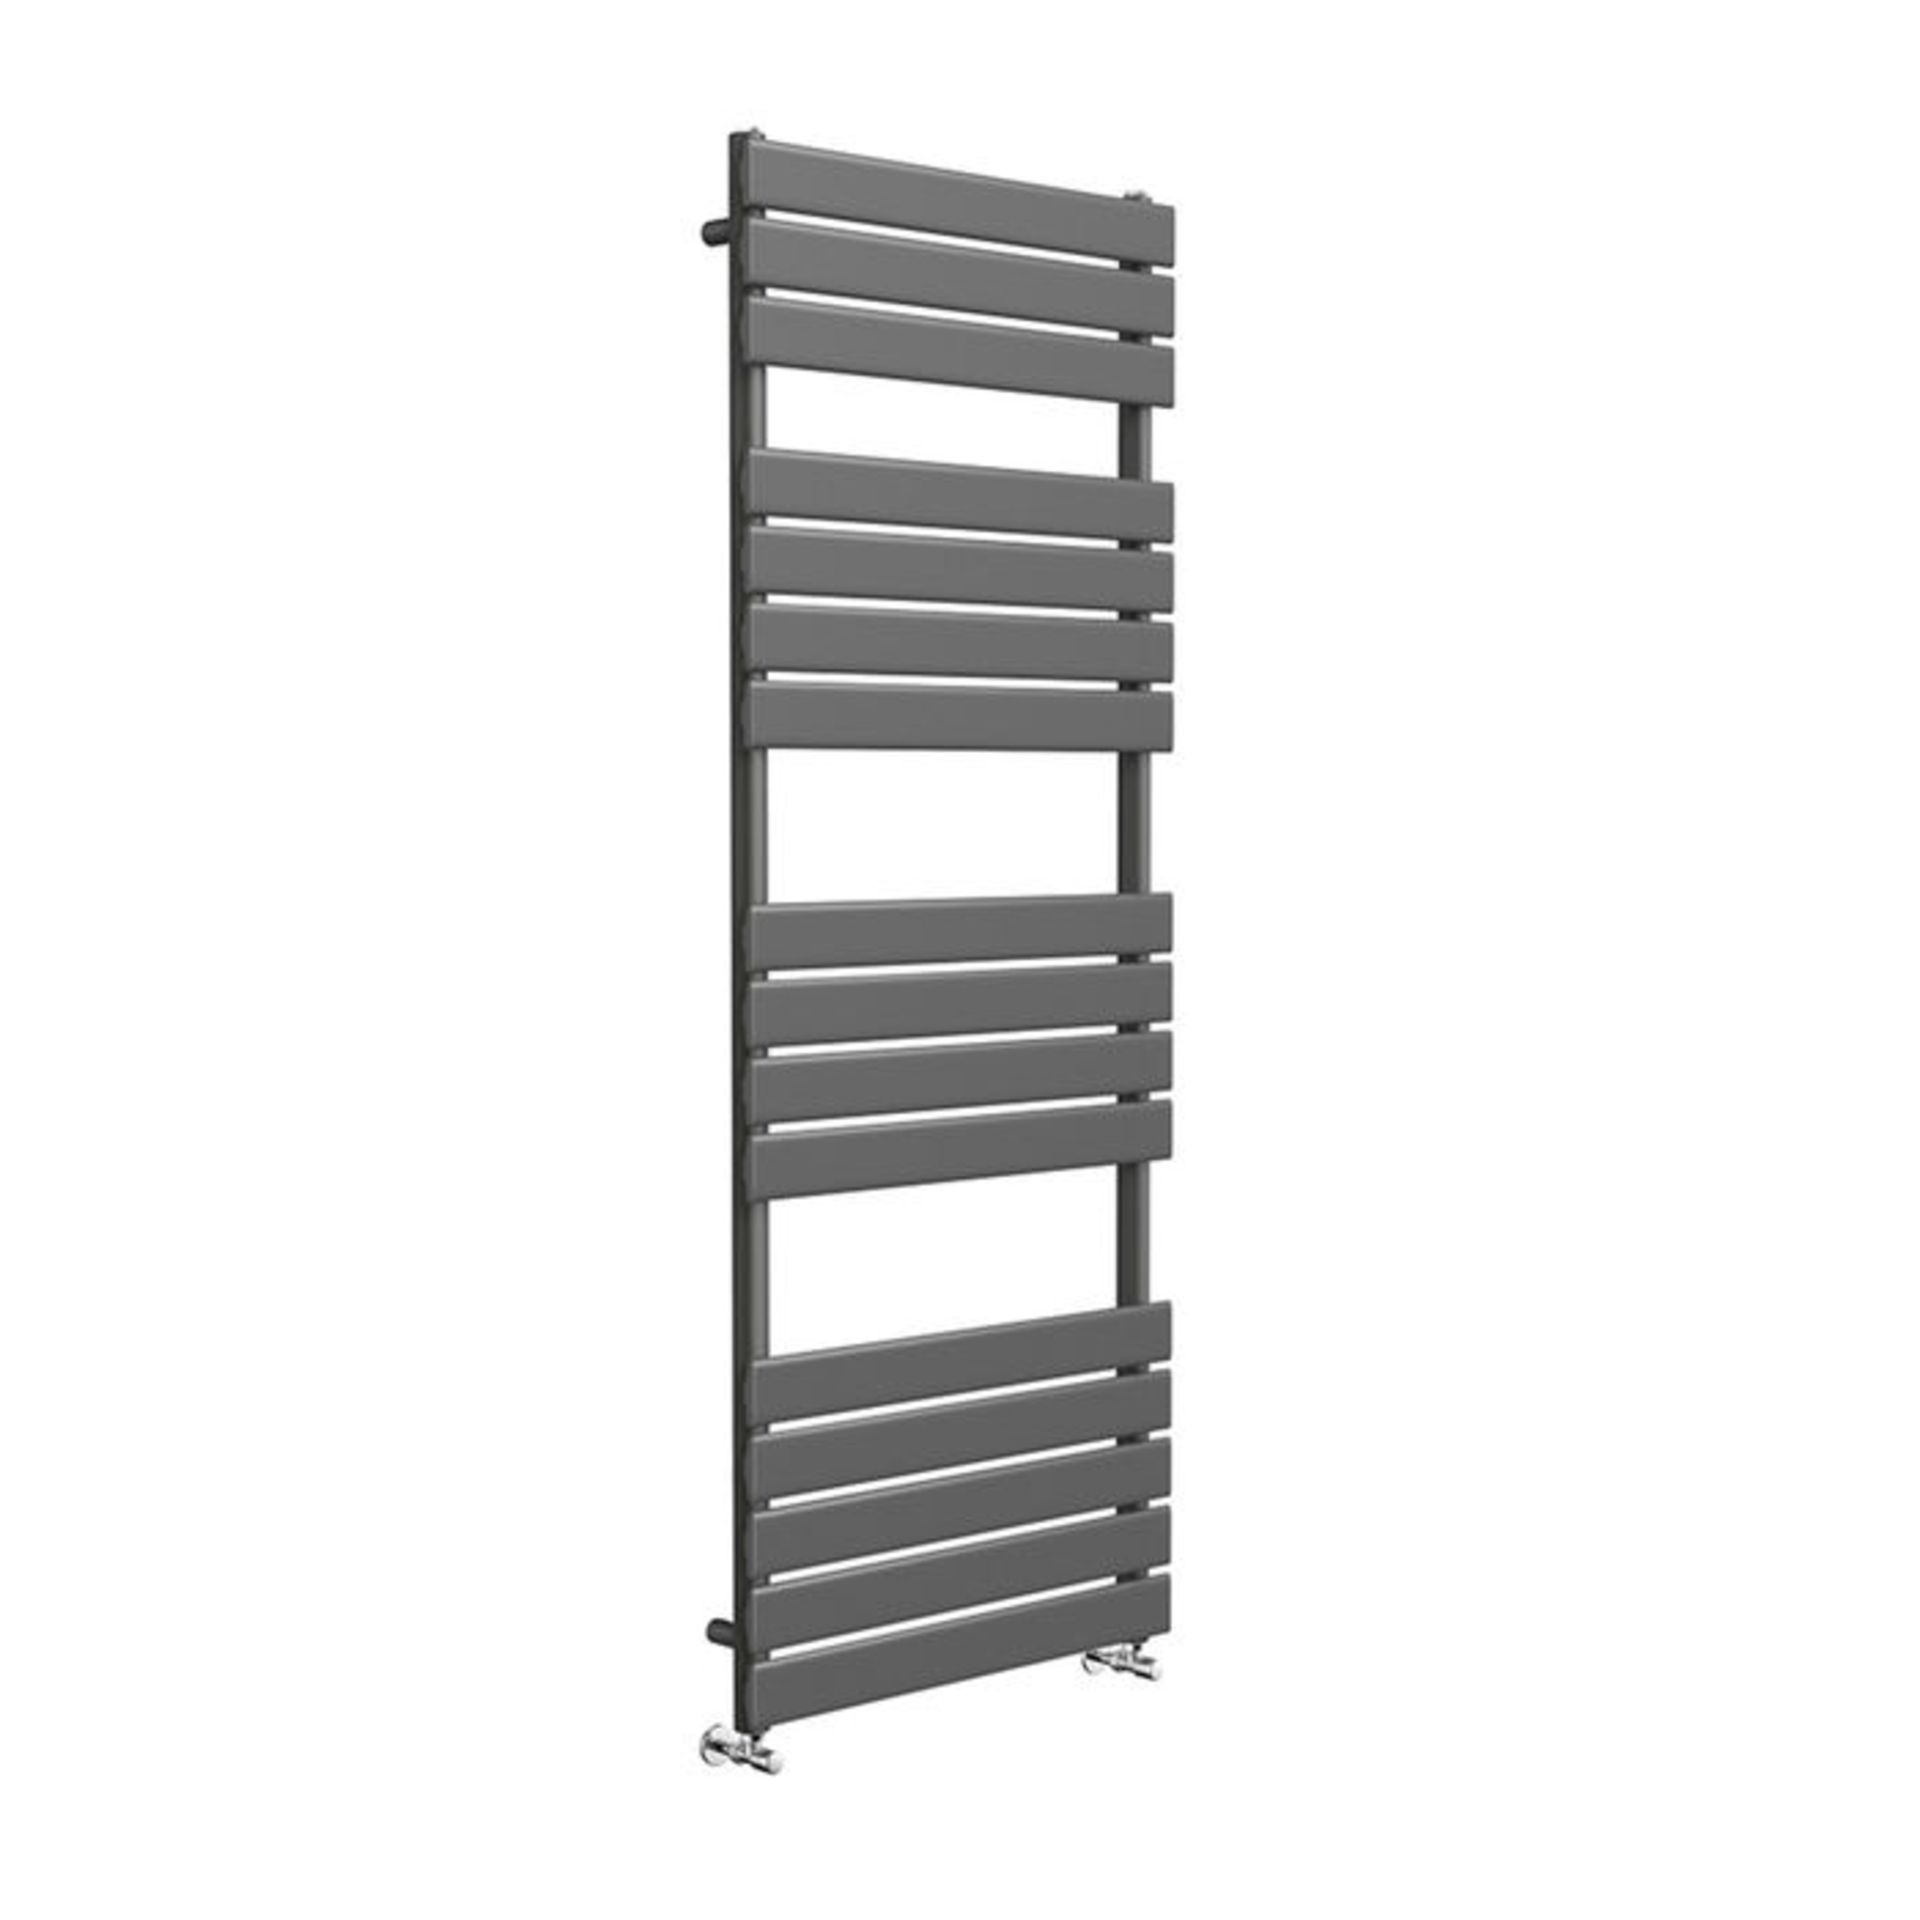 (DK125) 1600x600mm Anthracite Flat Panel Ladder Towel Radiator. RRP £399.99. Made with low carbon - Image 3 of 3